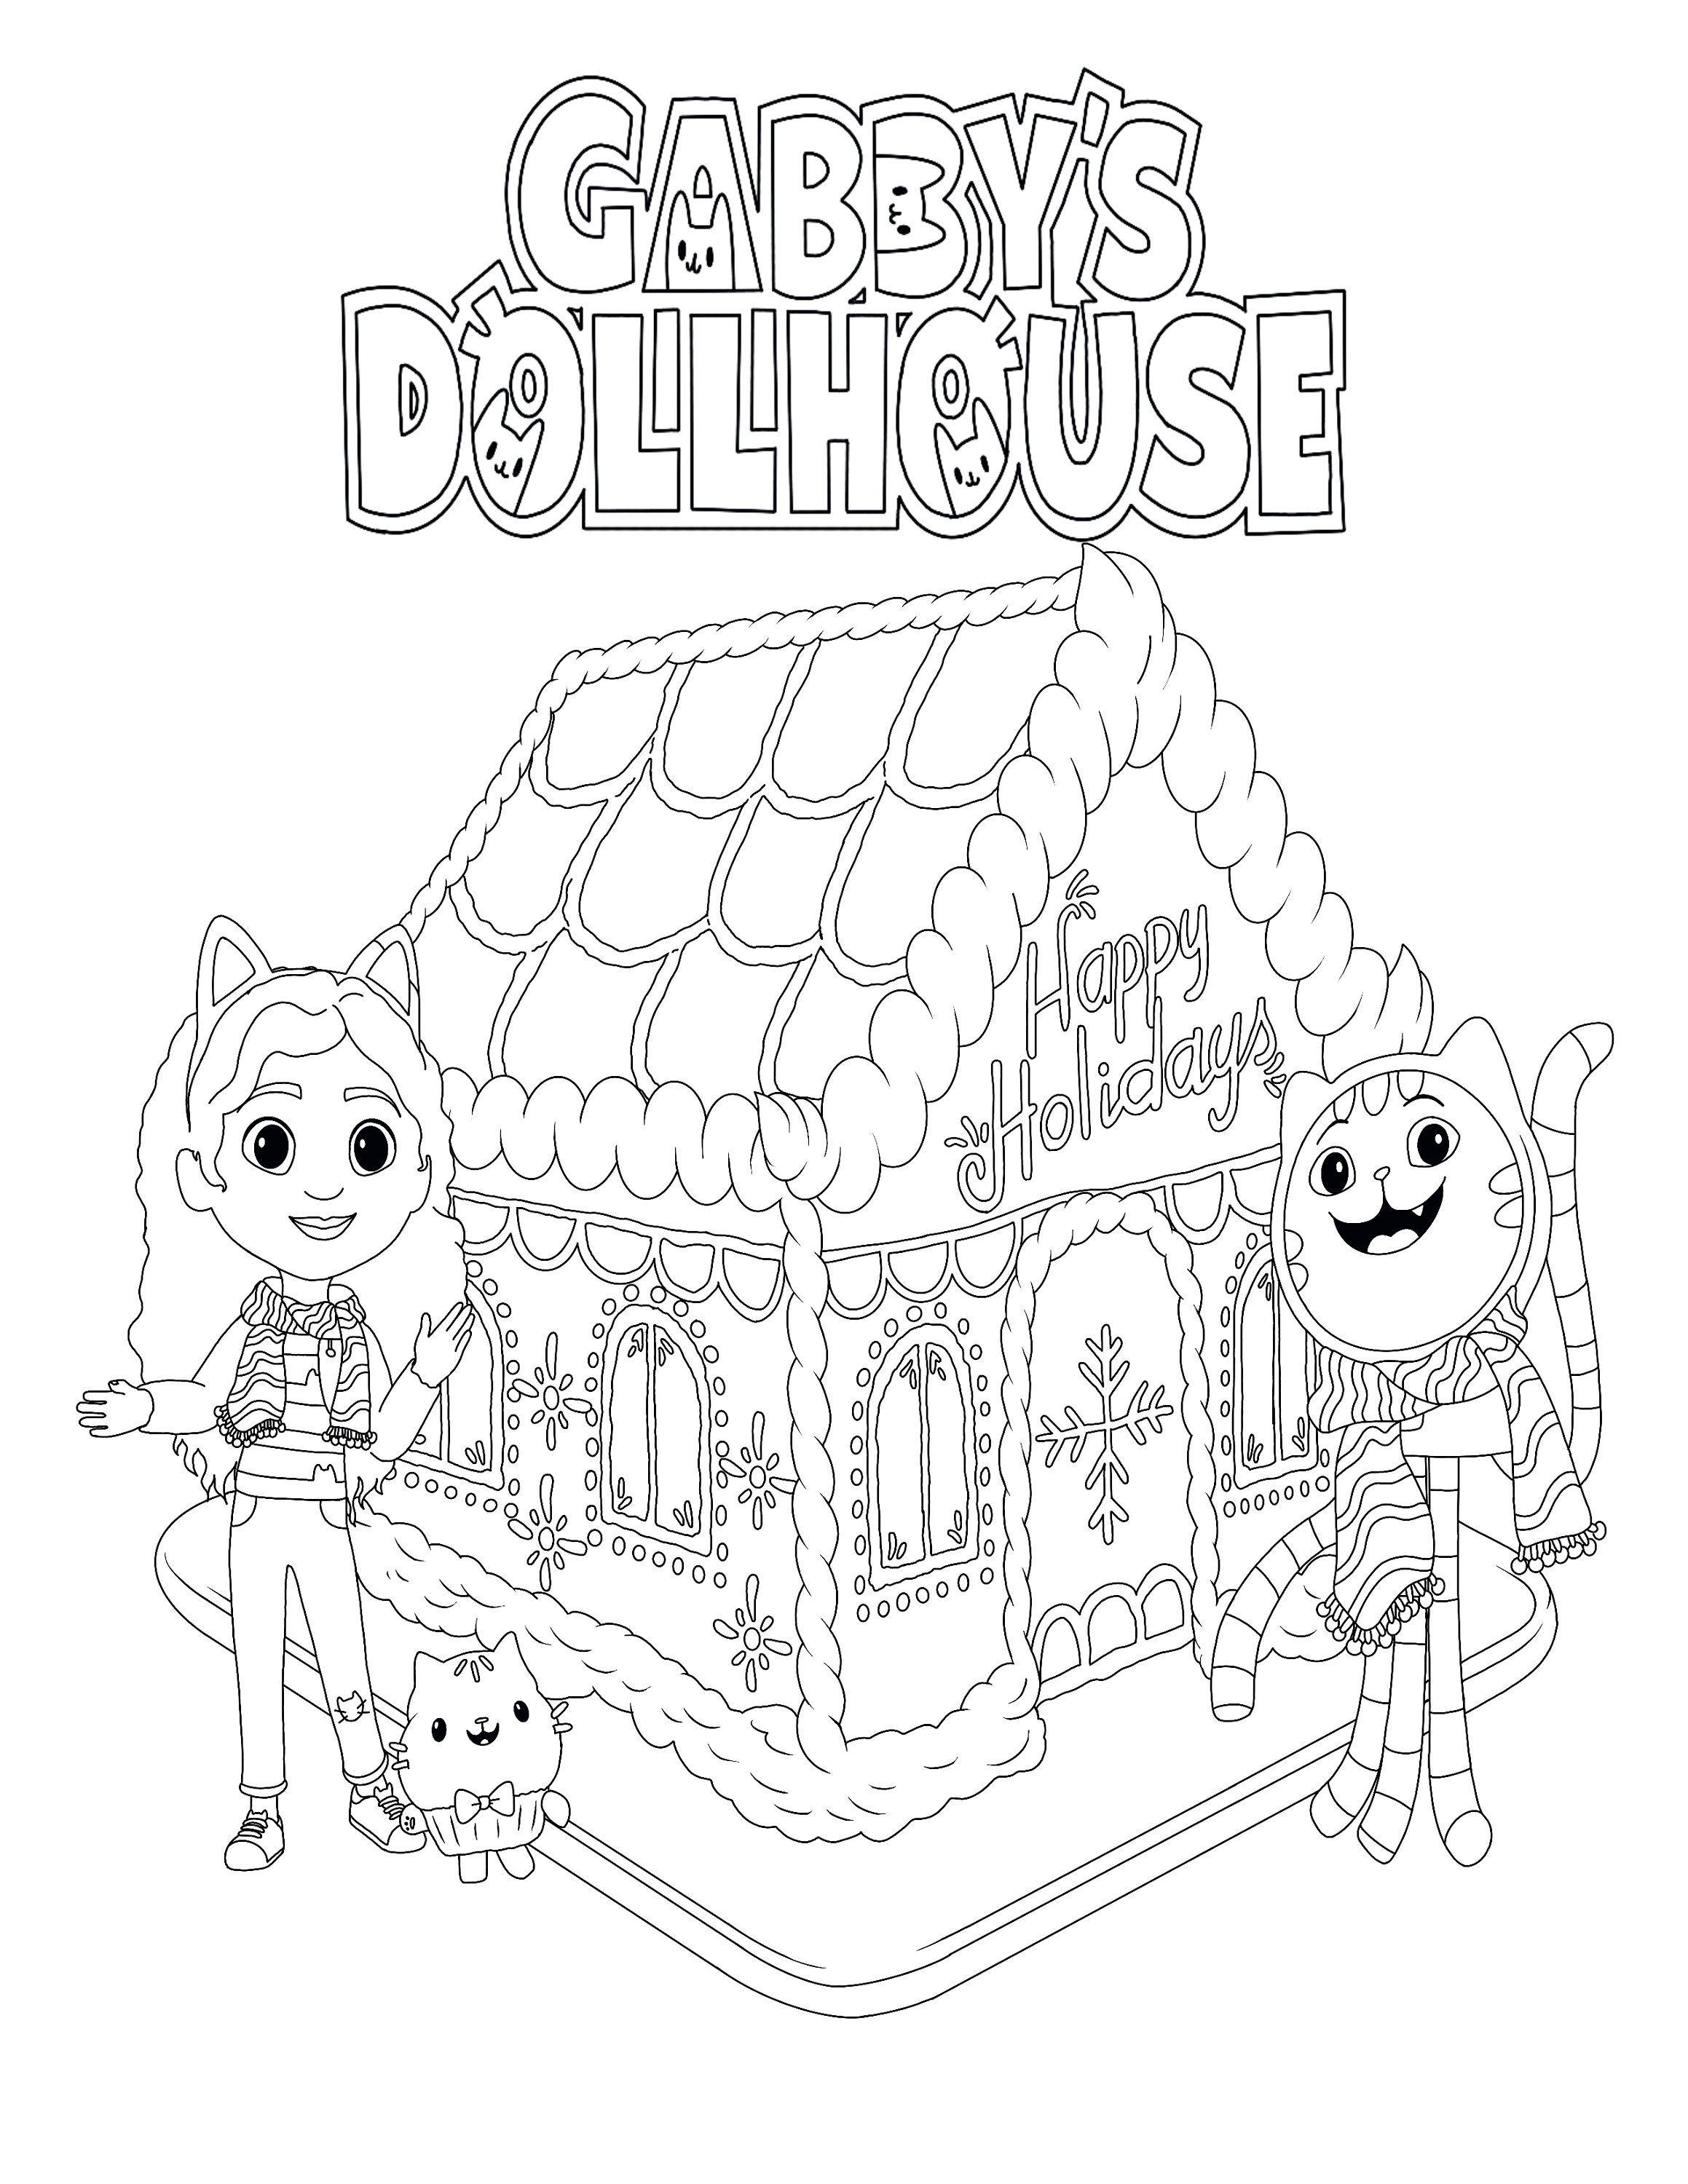 Gabbys dollhouse holiday coloring page printable download